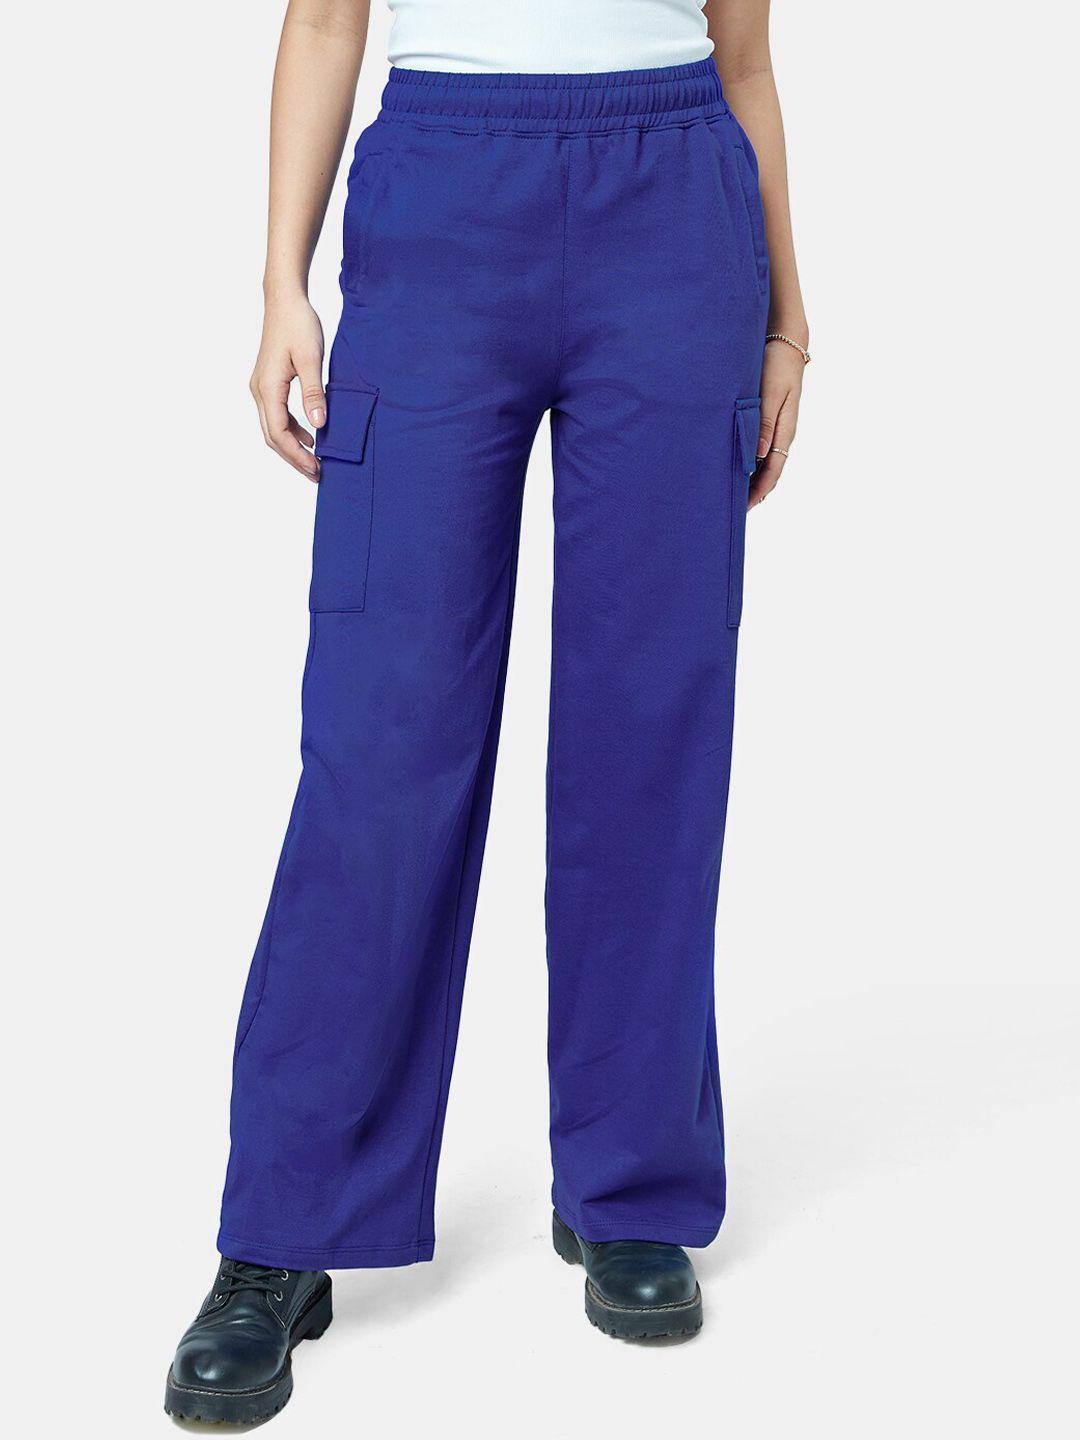 the souled store women straight fit cotton track pants